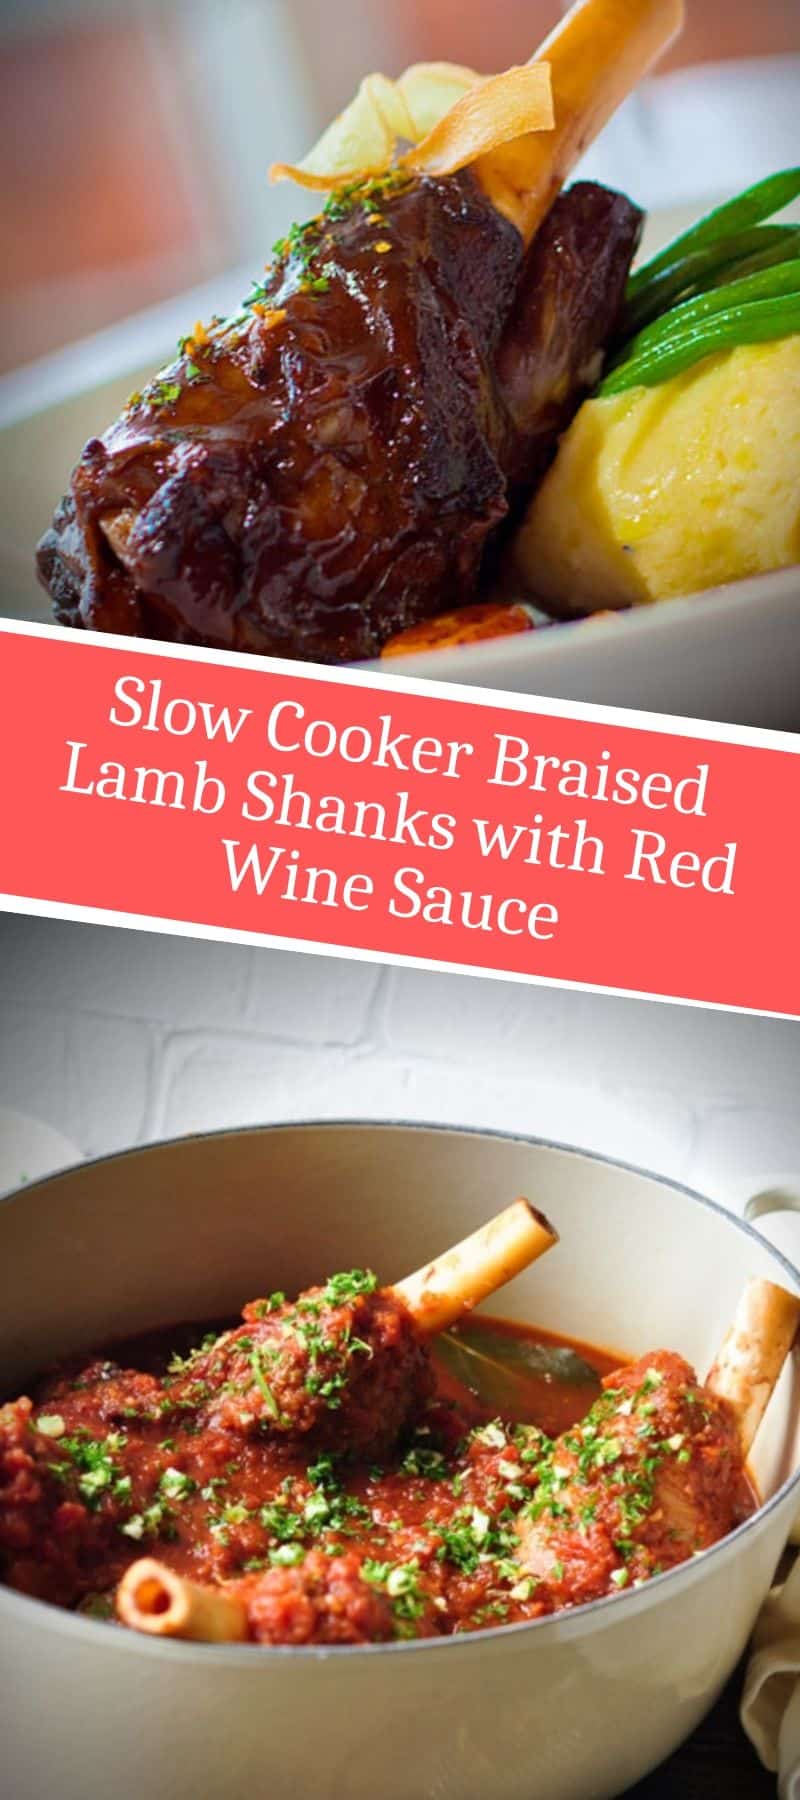 Slow Cooker Braised Lamb Shanks with Red Wine Sauce 3